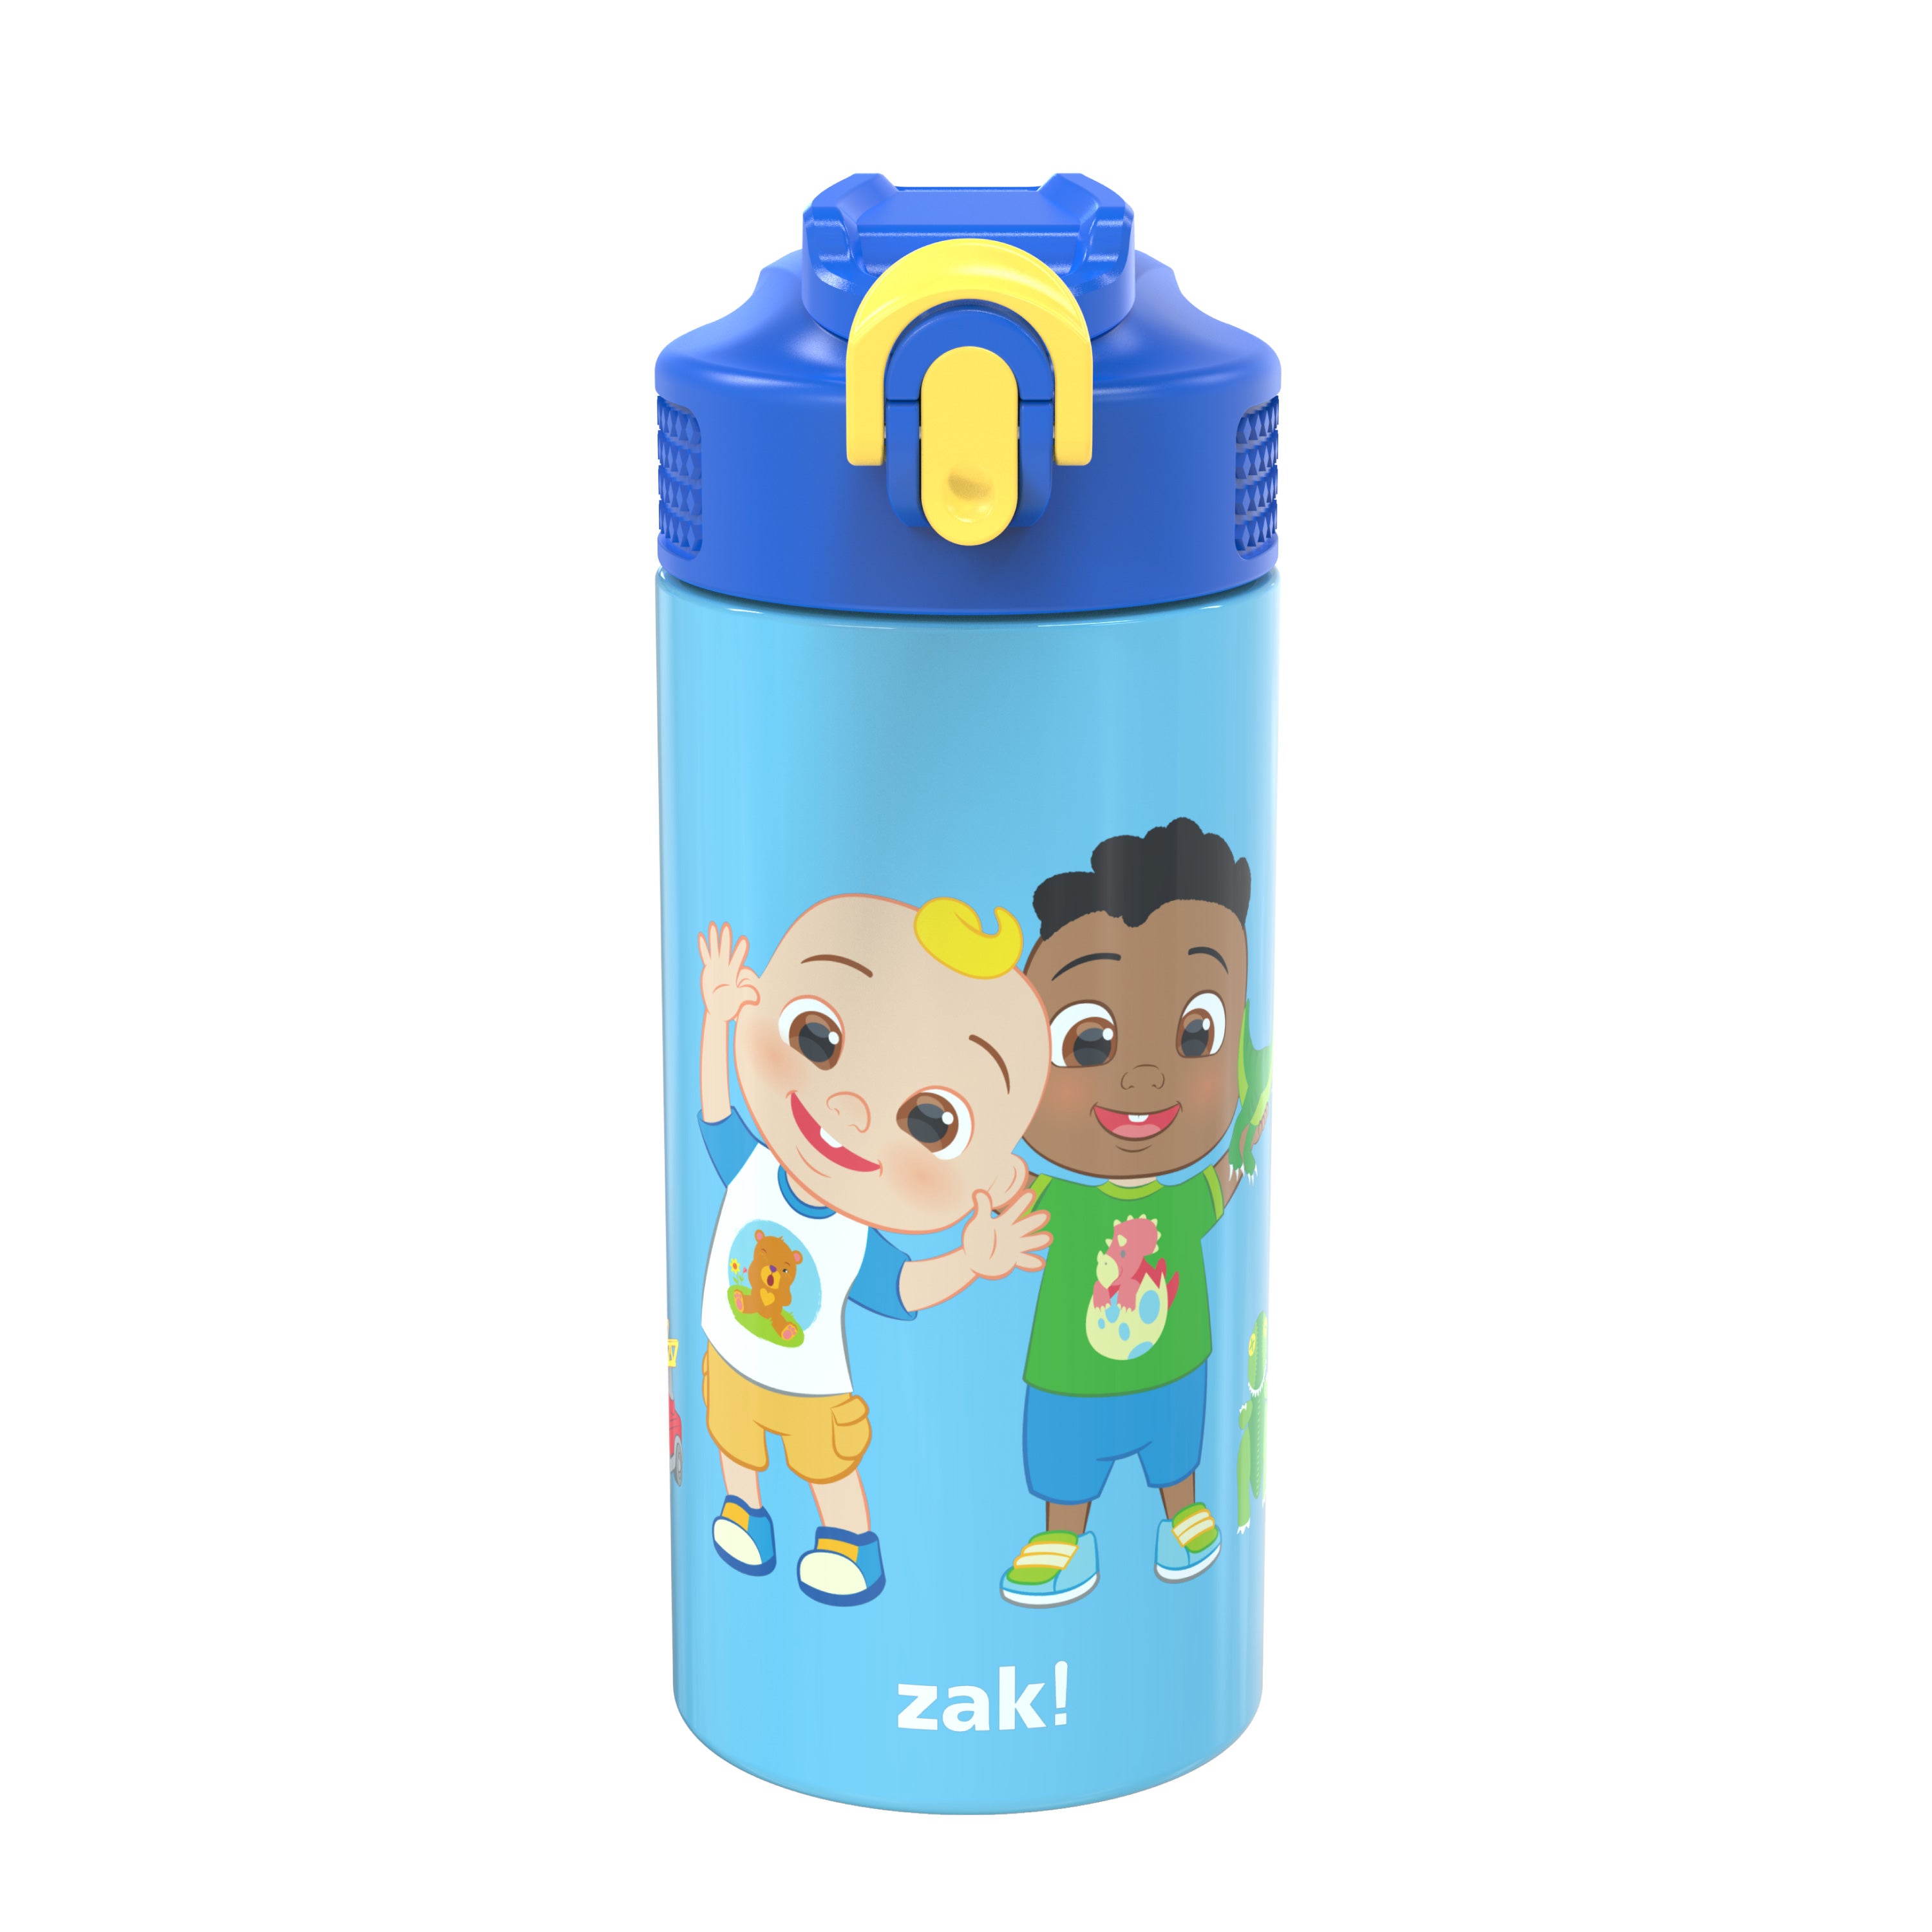 CoComelon Kids Stainless Steel Leak Proof Water Bottle with Push Button Lid and Spout